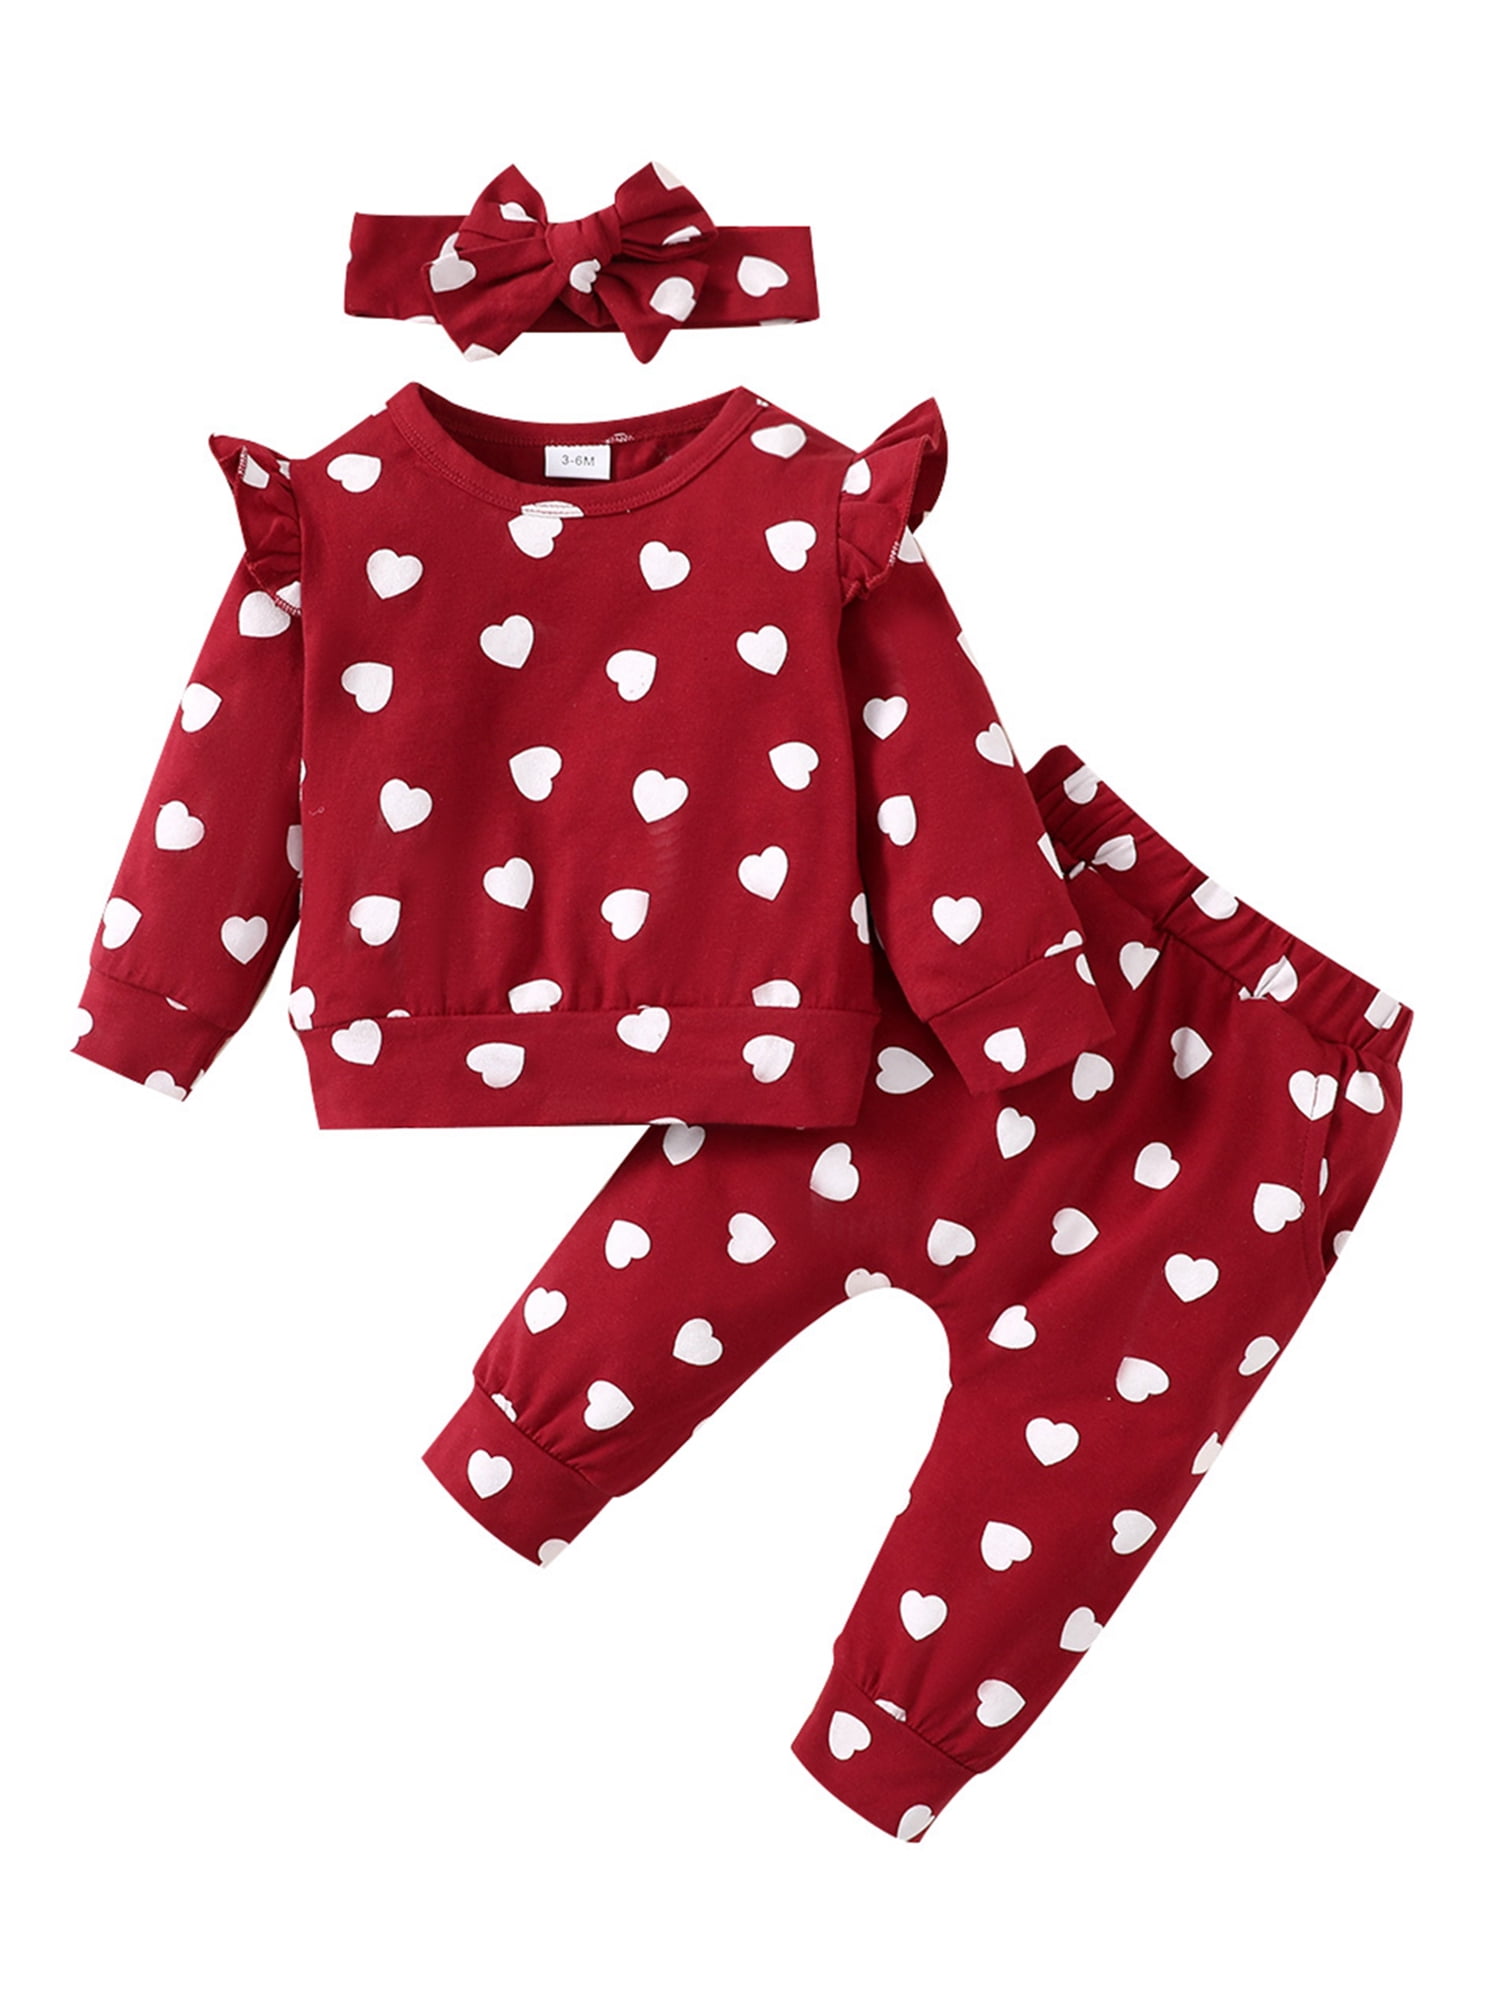 3Pcs Infant Outfits Valentine's Day Clothes Set Newborn Baby Girls Long ...